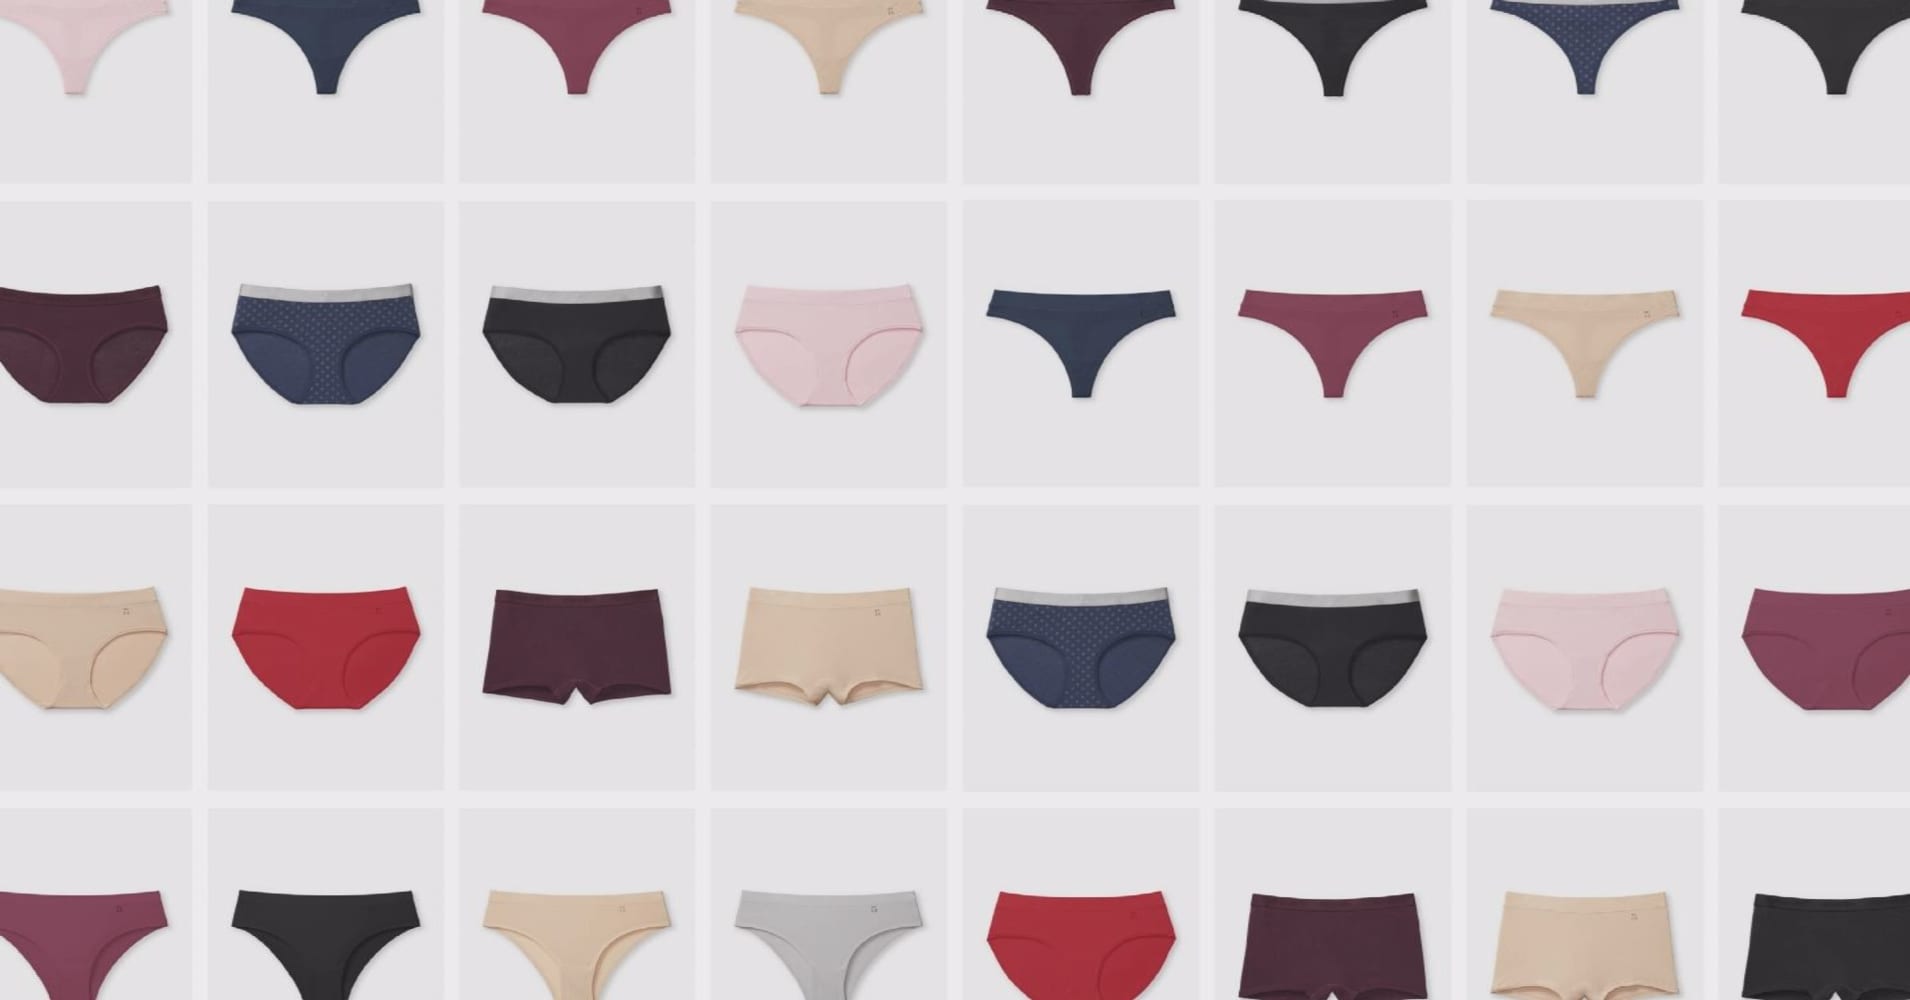 Tommy John introduces 'no panty line' underwear for women: CEO